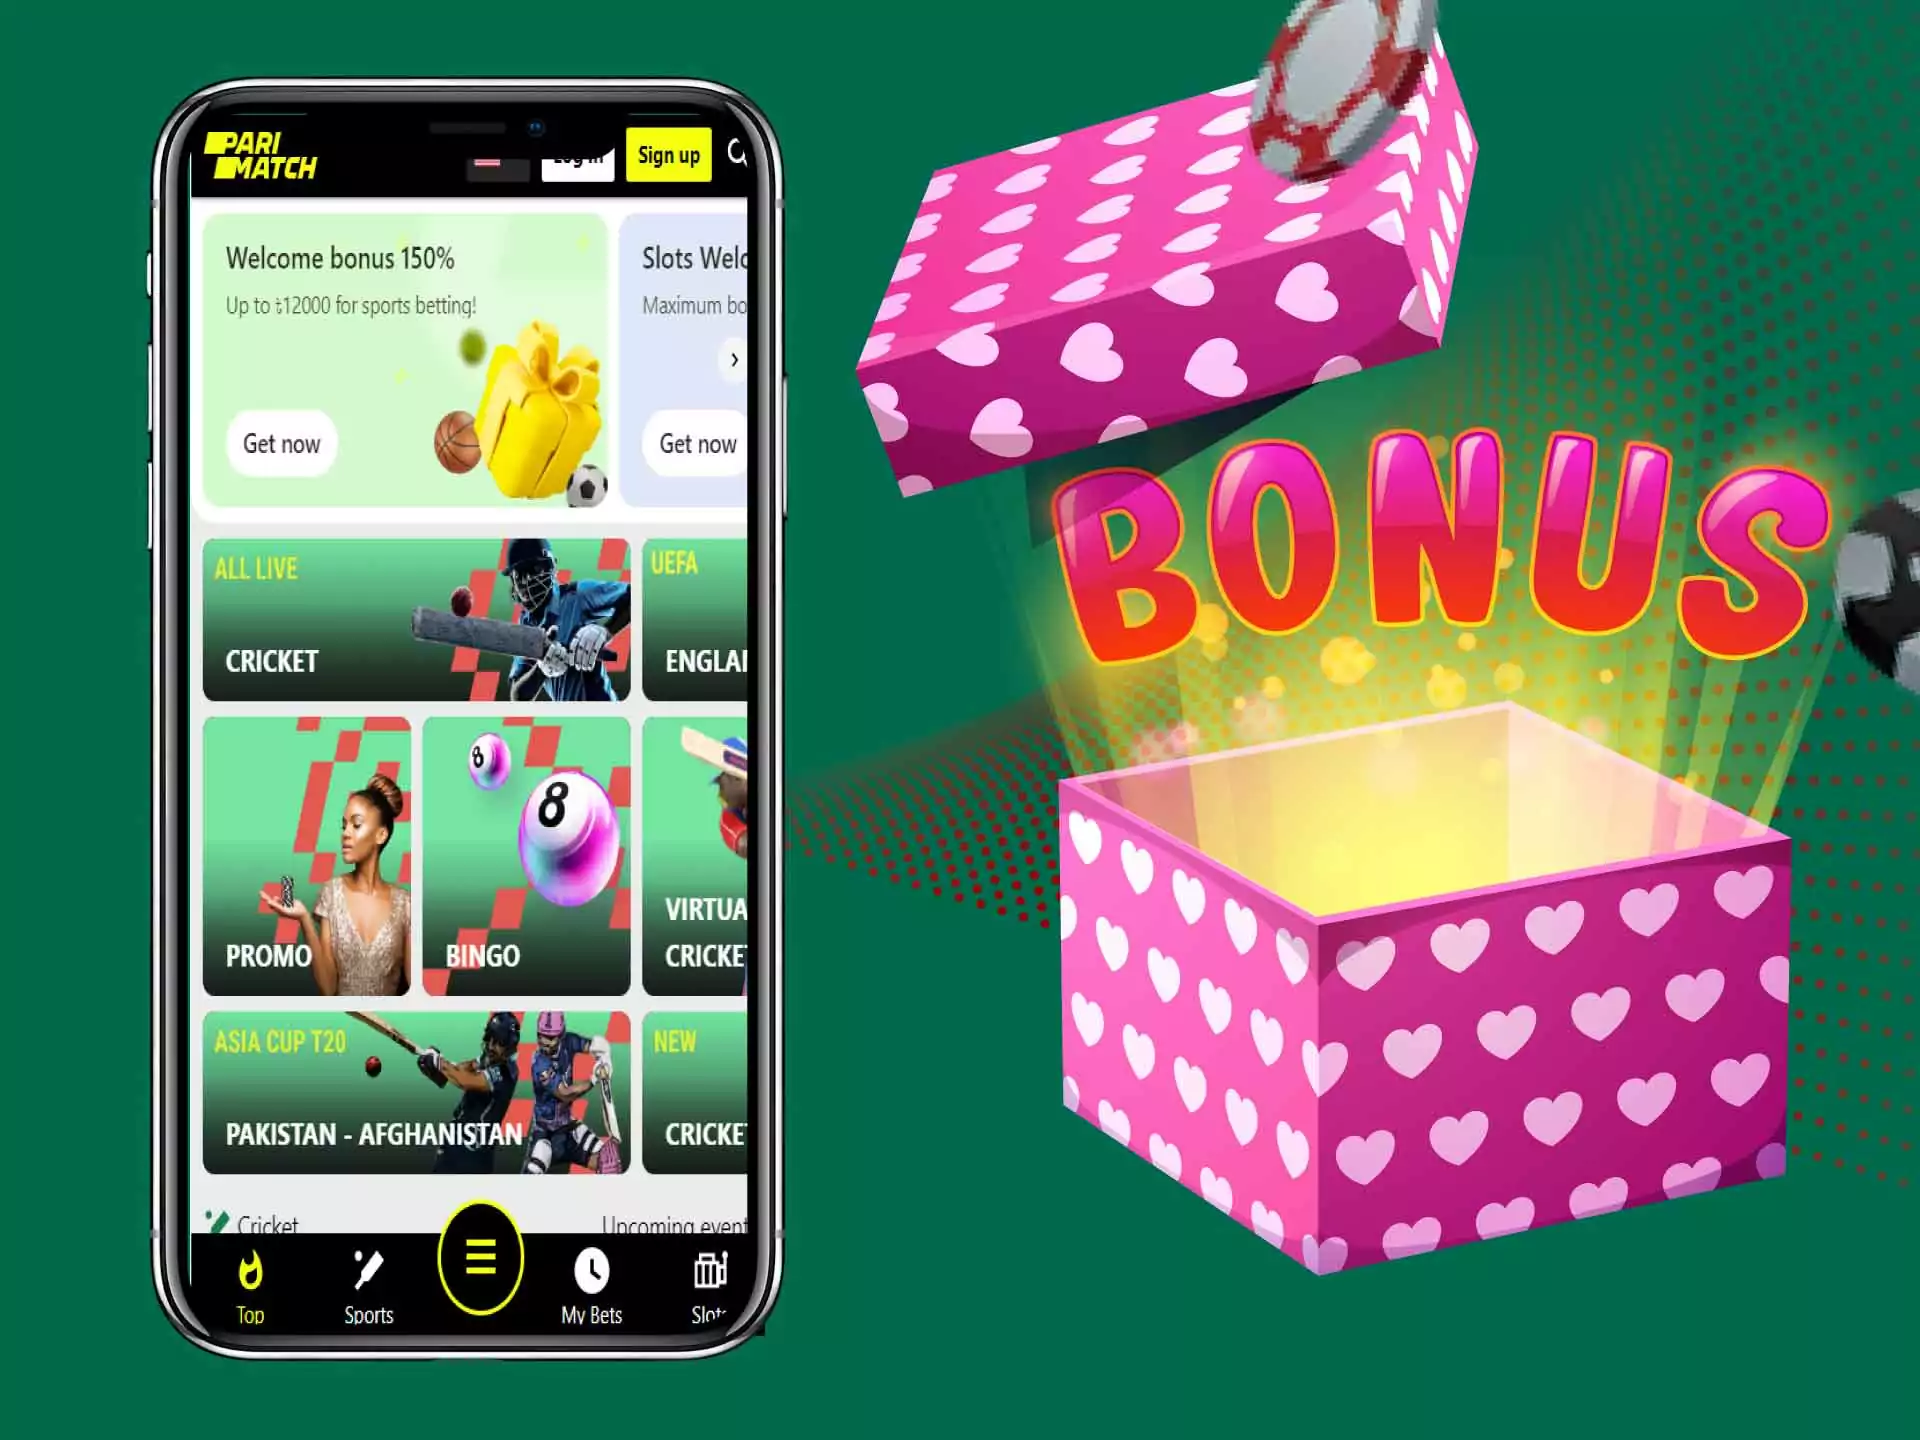 Receive a bonus of up to 125,000 BDT on caisno games.